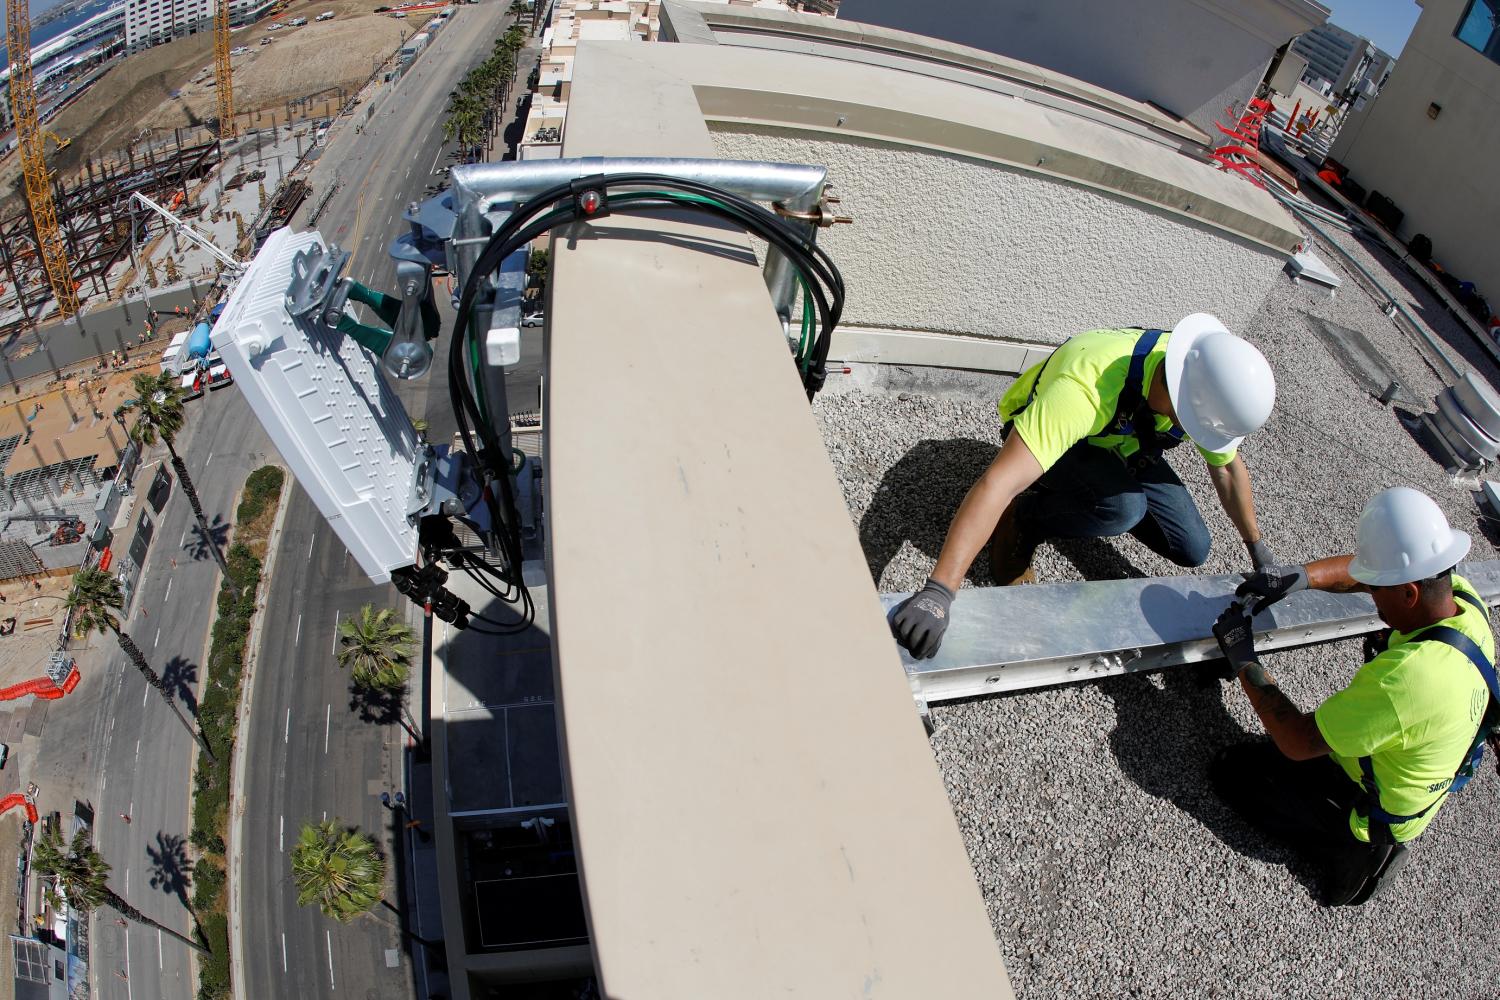 Telecommunications workers Chris Viens and Guy Glover install a new 5G antenna system made by Ericsson for AT&T's 5G wireless network in downtown San Diego, California, U.S., April 23, 2019. Picture taken with a fish eye lens. REUTERS/Mike Blake - RC1BDEA71CE0